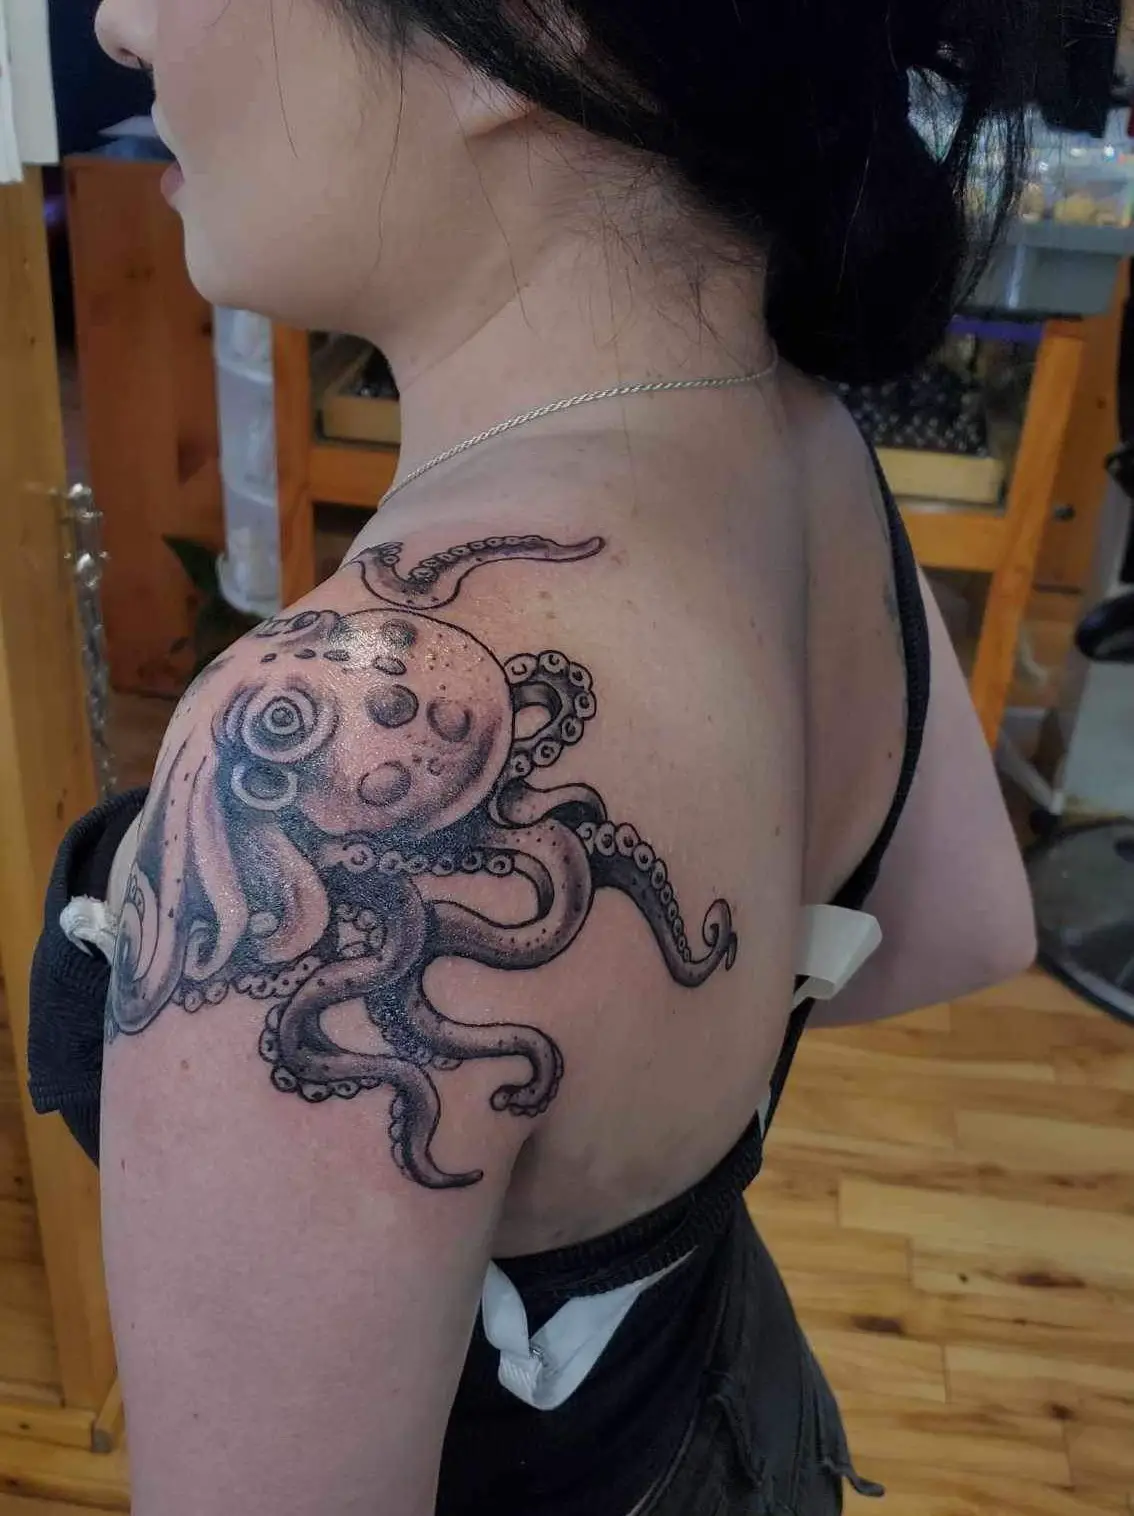 anuj gakhar share girl with the octopus tattoo photos